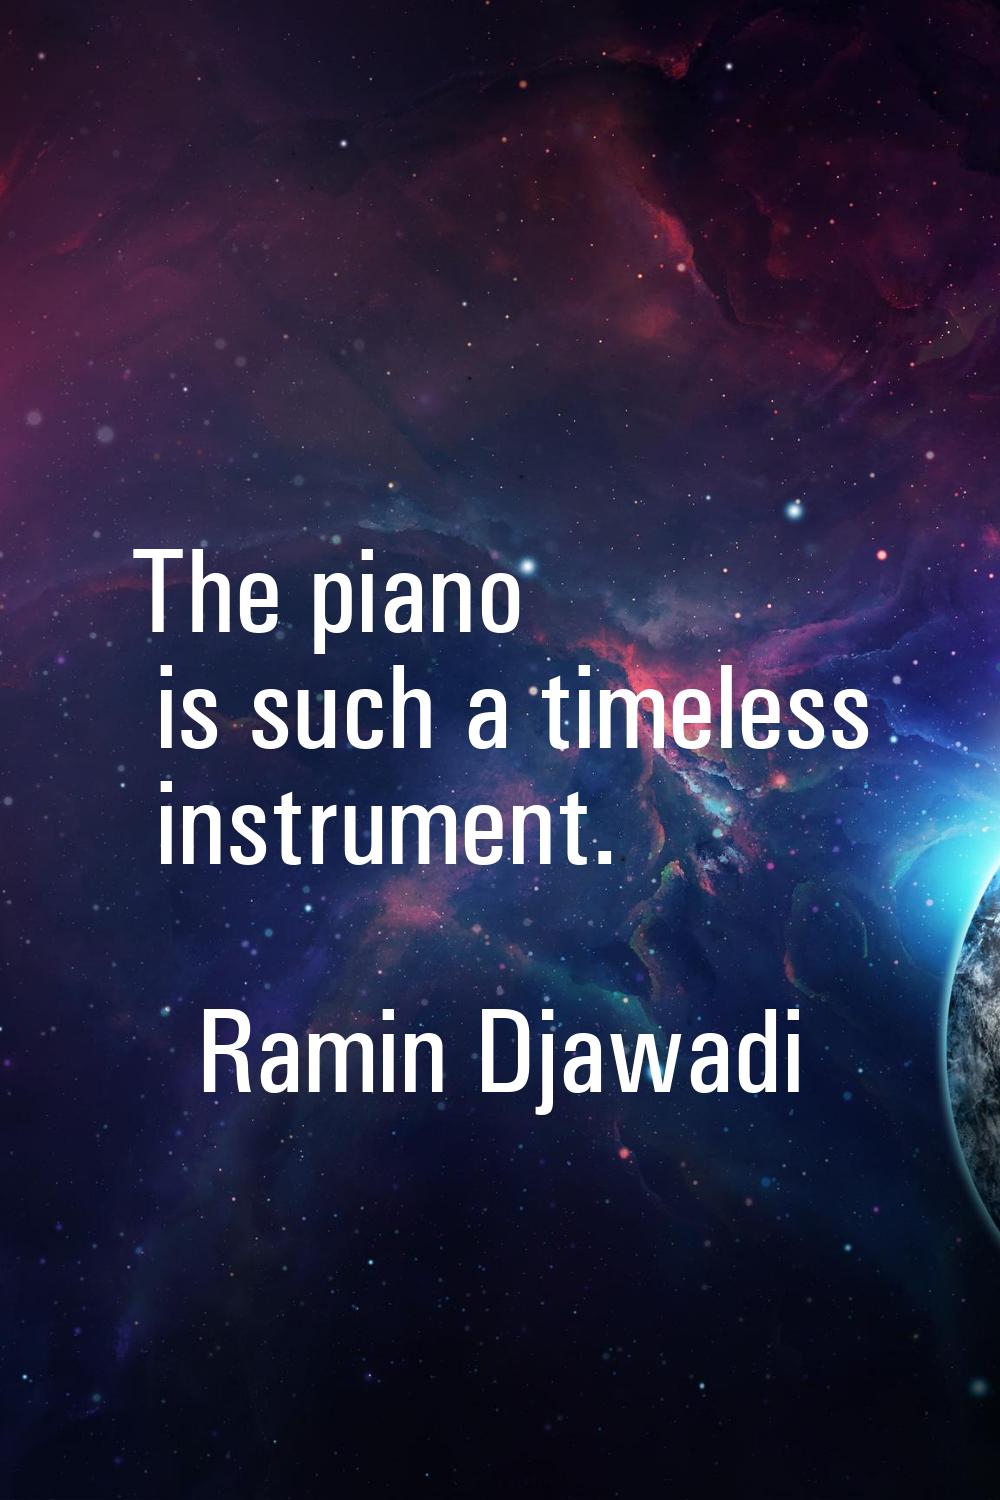 The piano is such a timeless instrument.